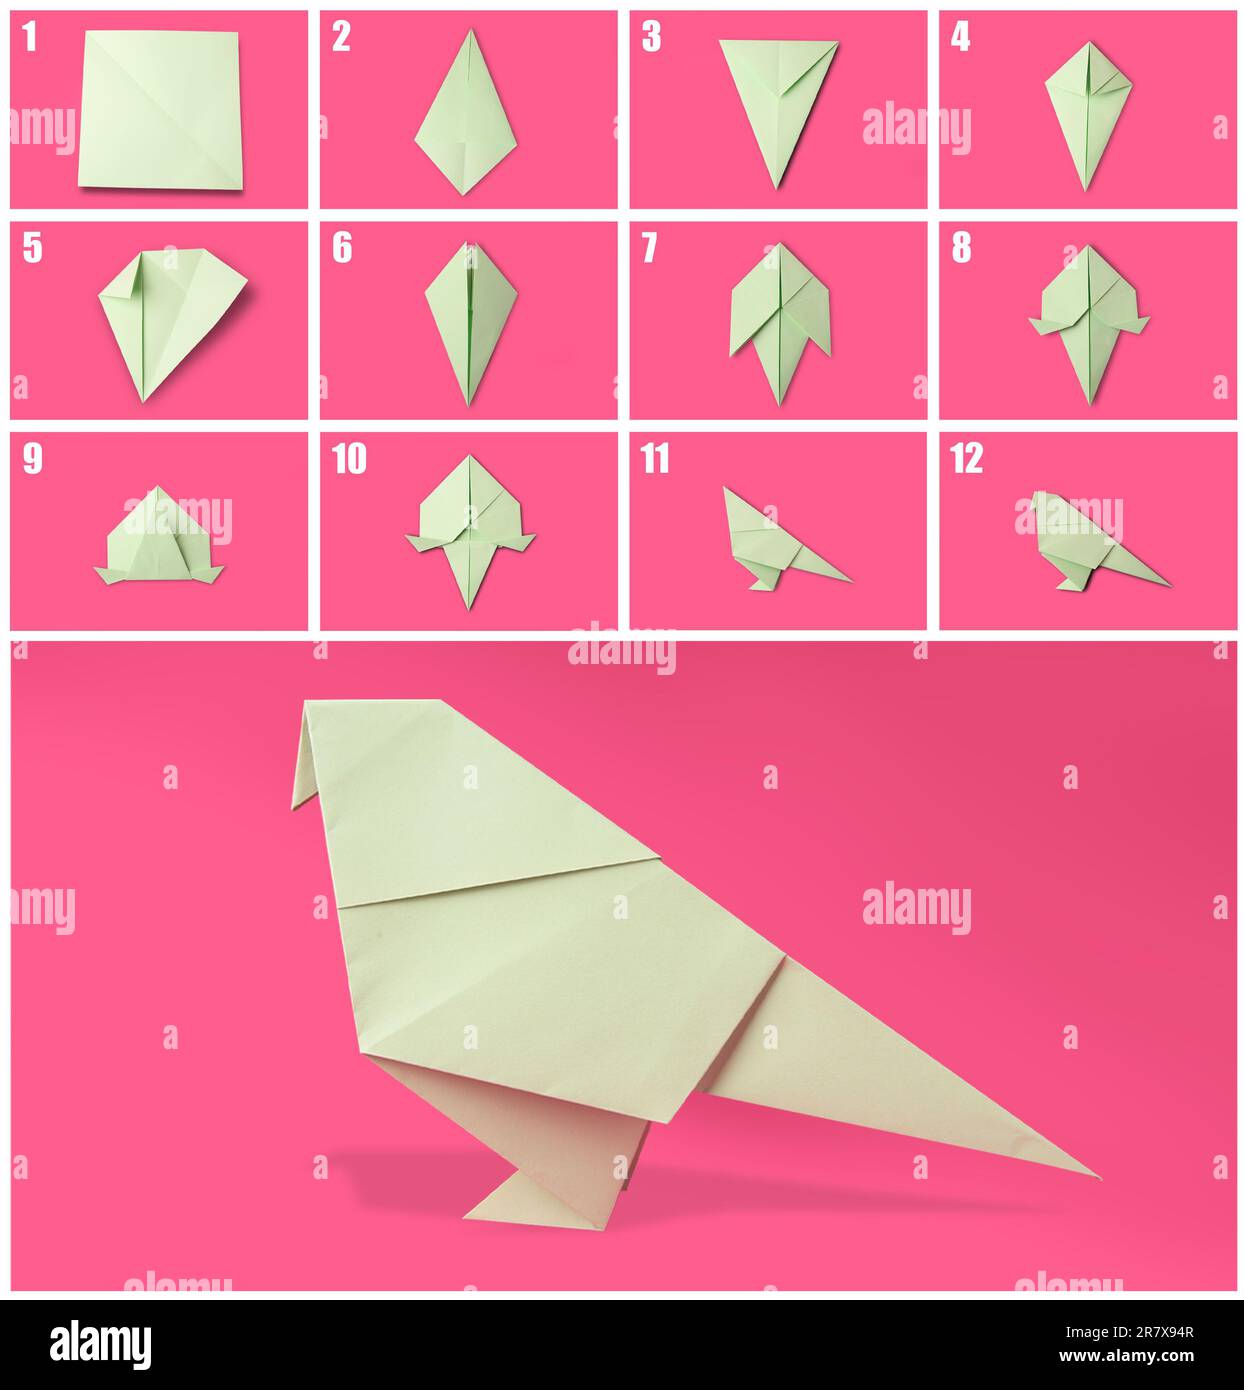 Origami art. Making paper bird step by step, photo collage on pink  background Stock Photo - Alamy